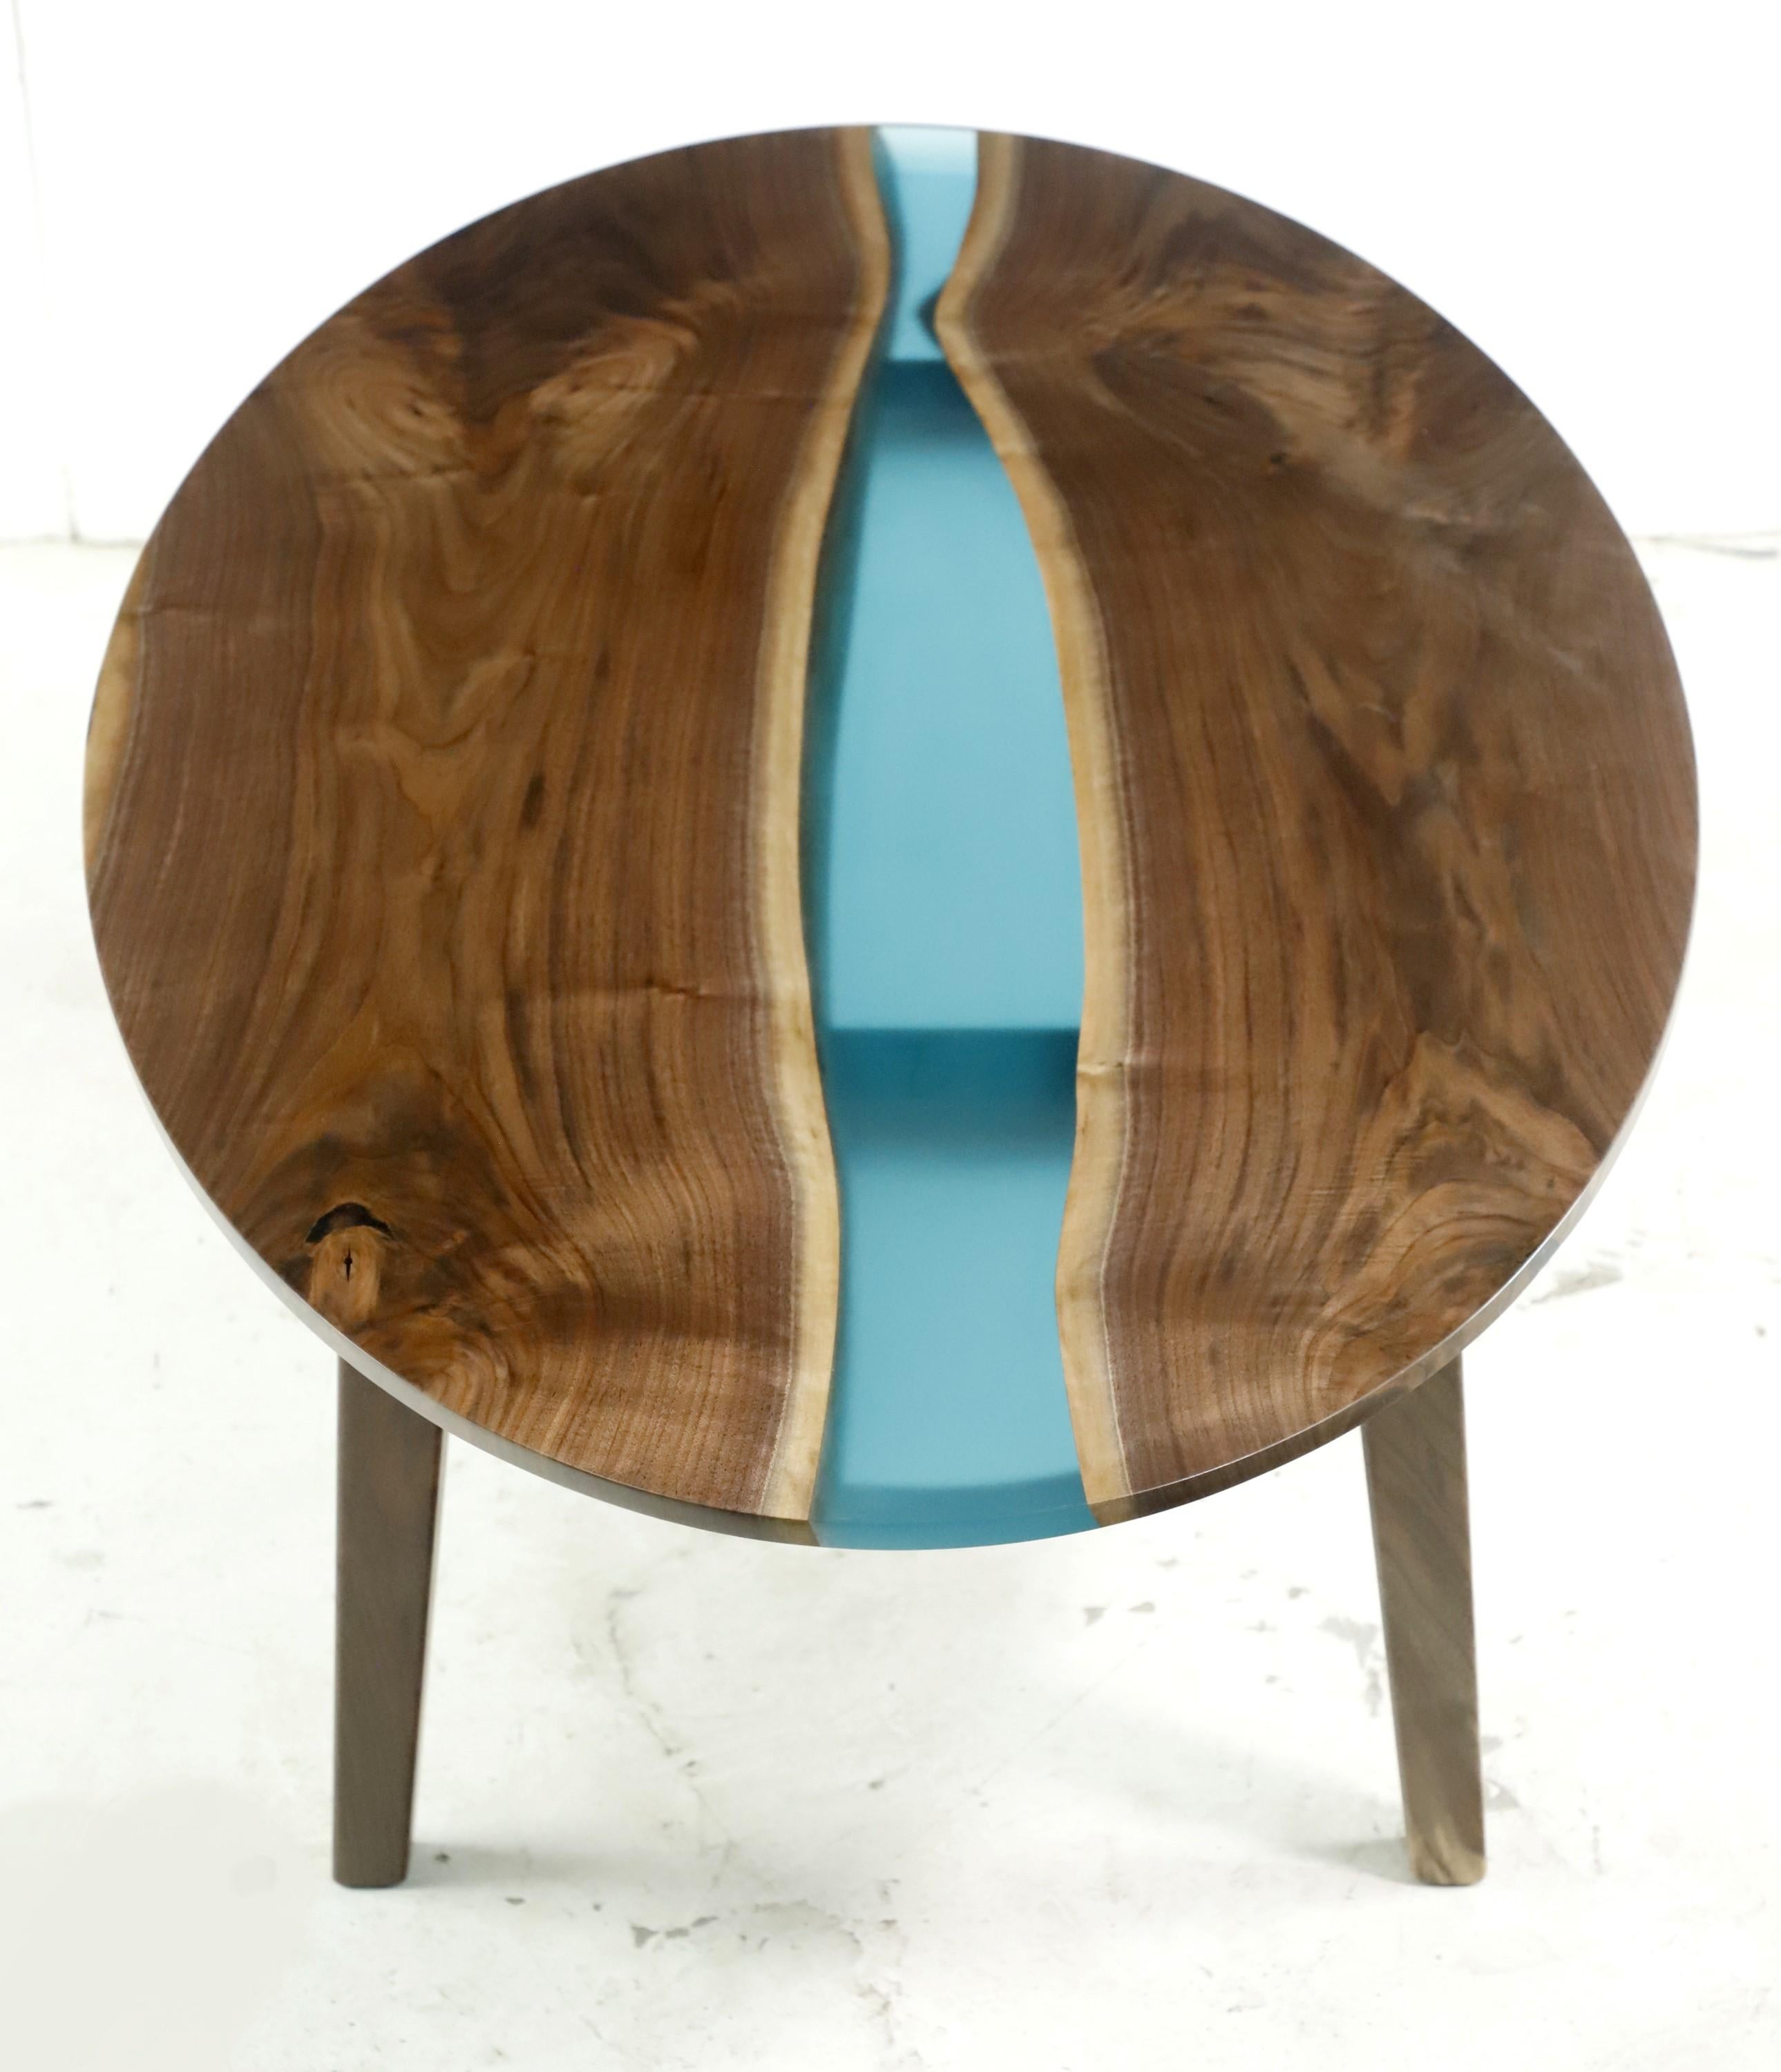 Newly made from recovered walnut, this table features a two slab solid walnut construction with a blue center resin pour. Comes with Modern style tapered legs. Please note, this item is located in one of our NYC locations.